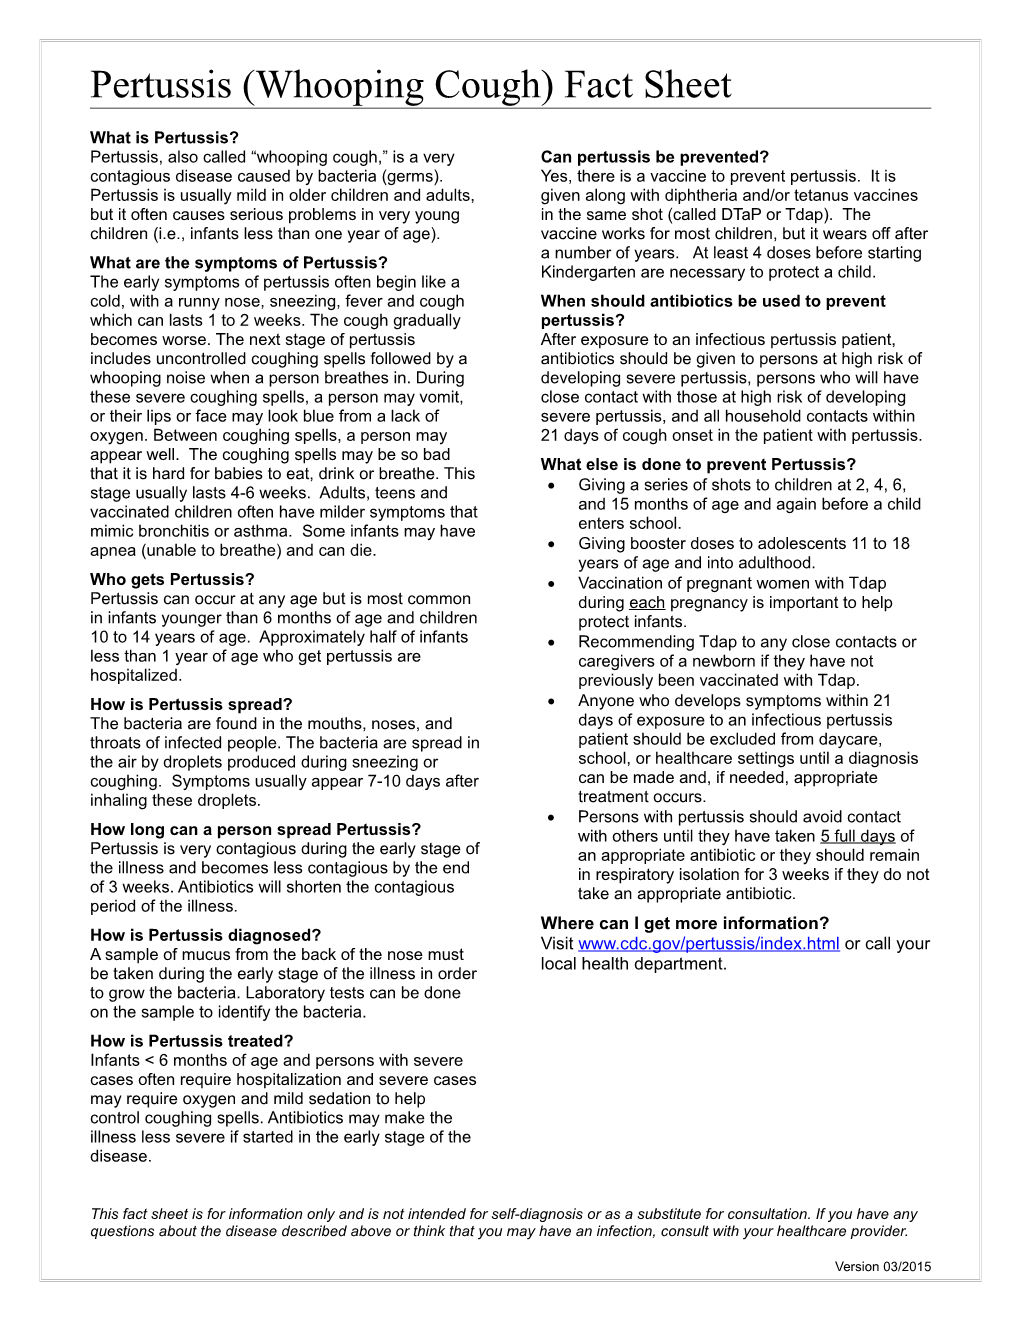 Pertussis (Whooping Cough) Fact Sheet